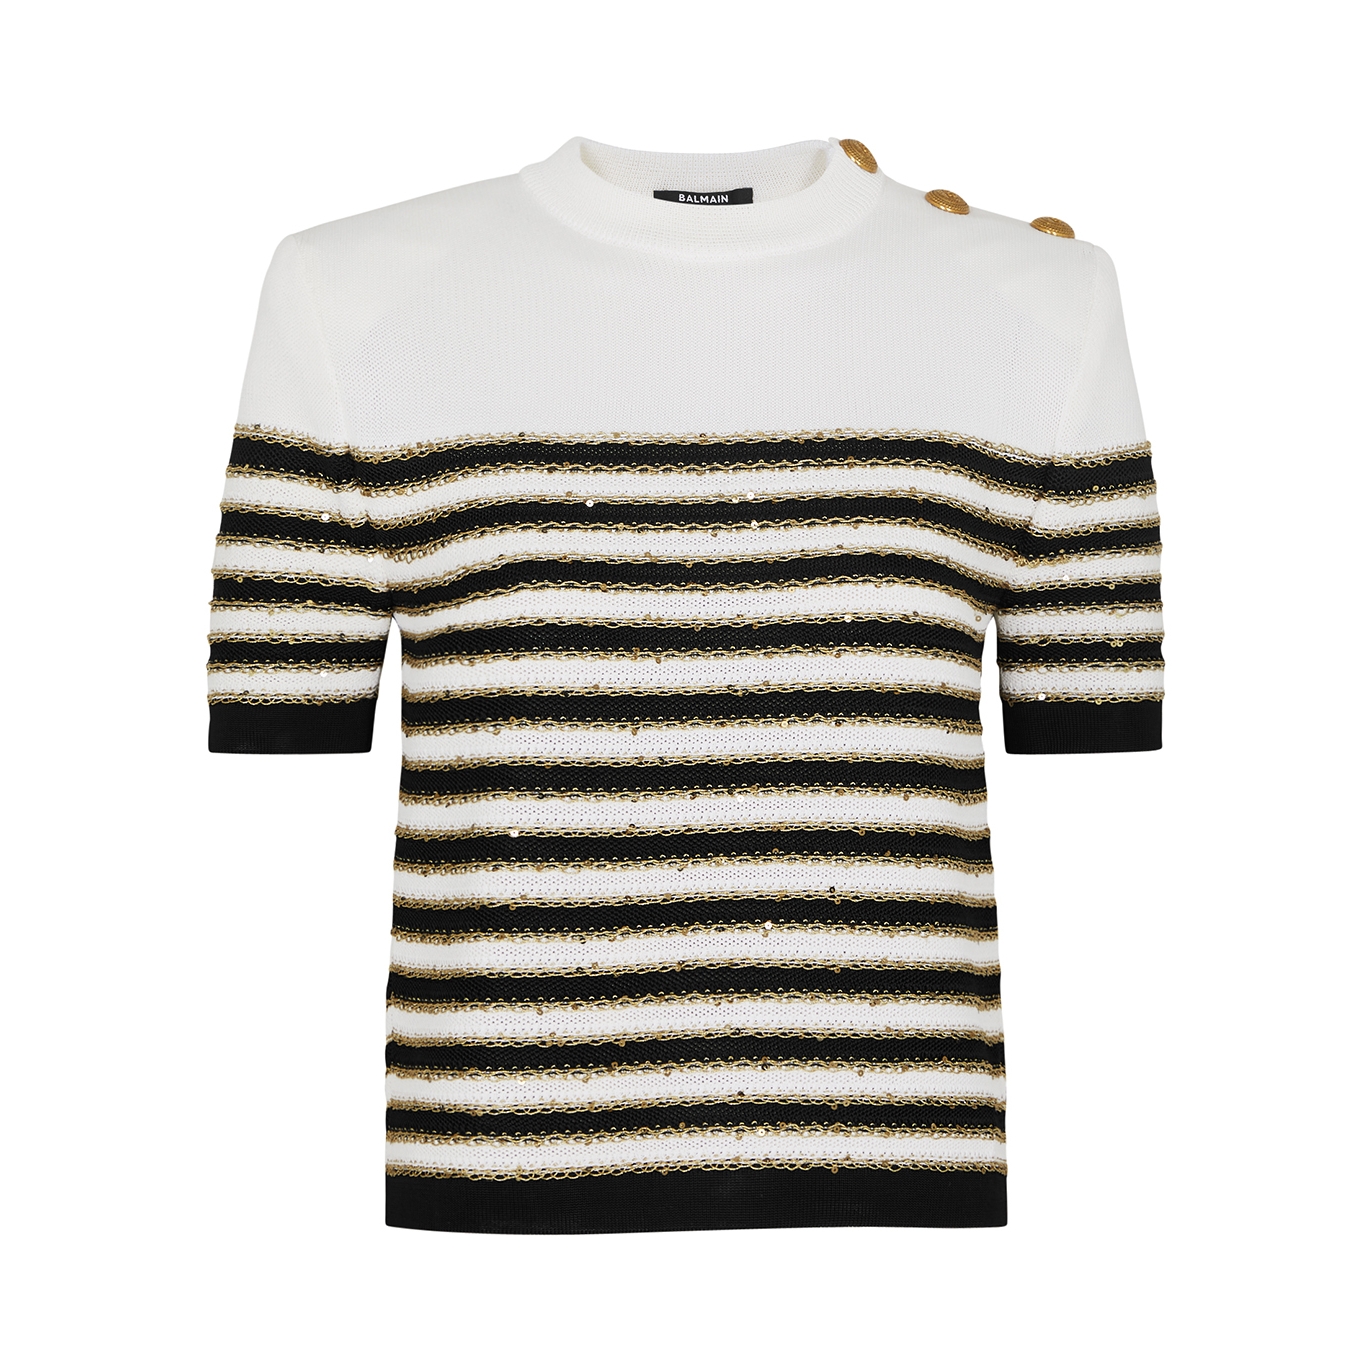 Balmain Striped Embellished Knitted Top